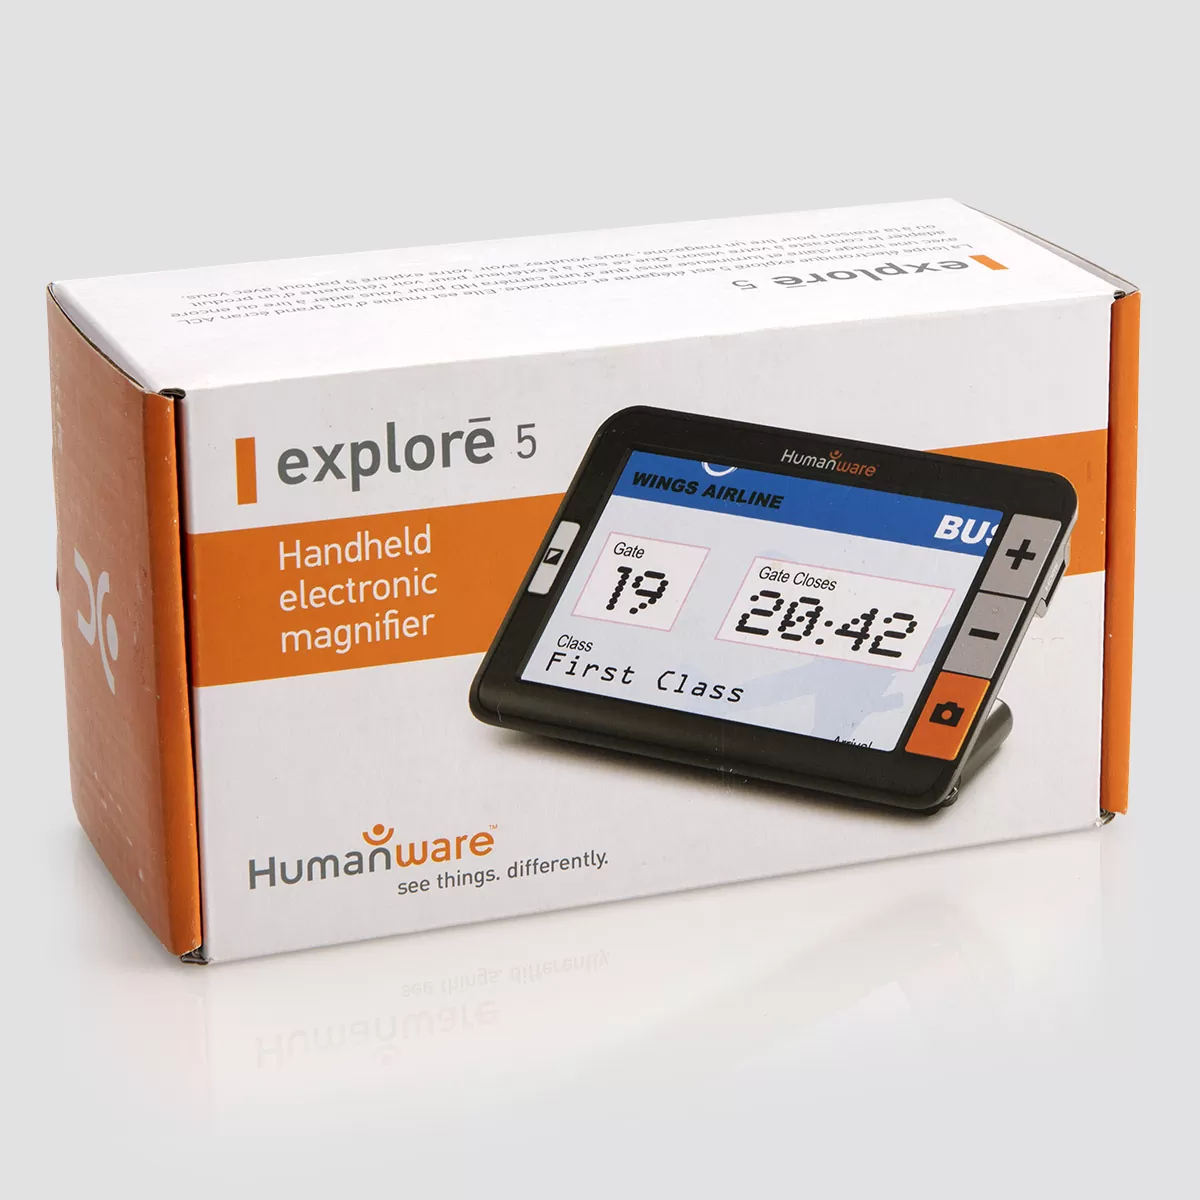 Humanware Explore 5 electronic magnifier in manufacturer packaging. The box is white and orange and features a close up of the device which features a high definition LCD screen with physical buttons that include a bright orange camera button and buttons to increase and decrease size. The device is angled and can stand up on its own for easy viewing.